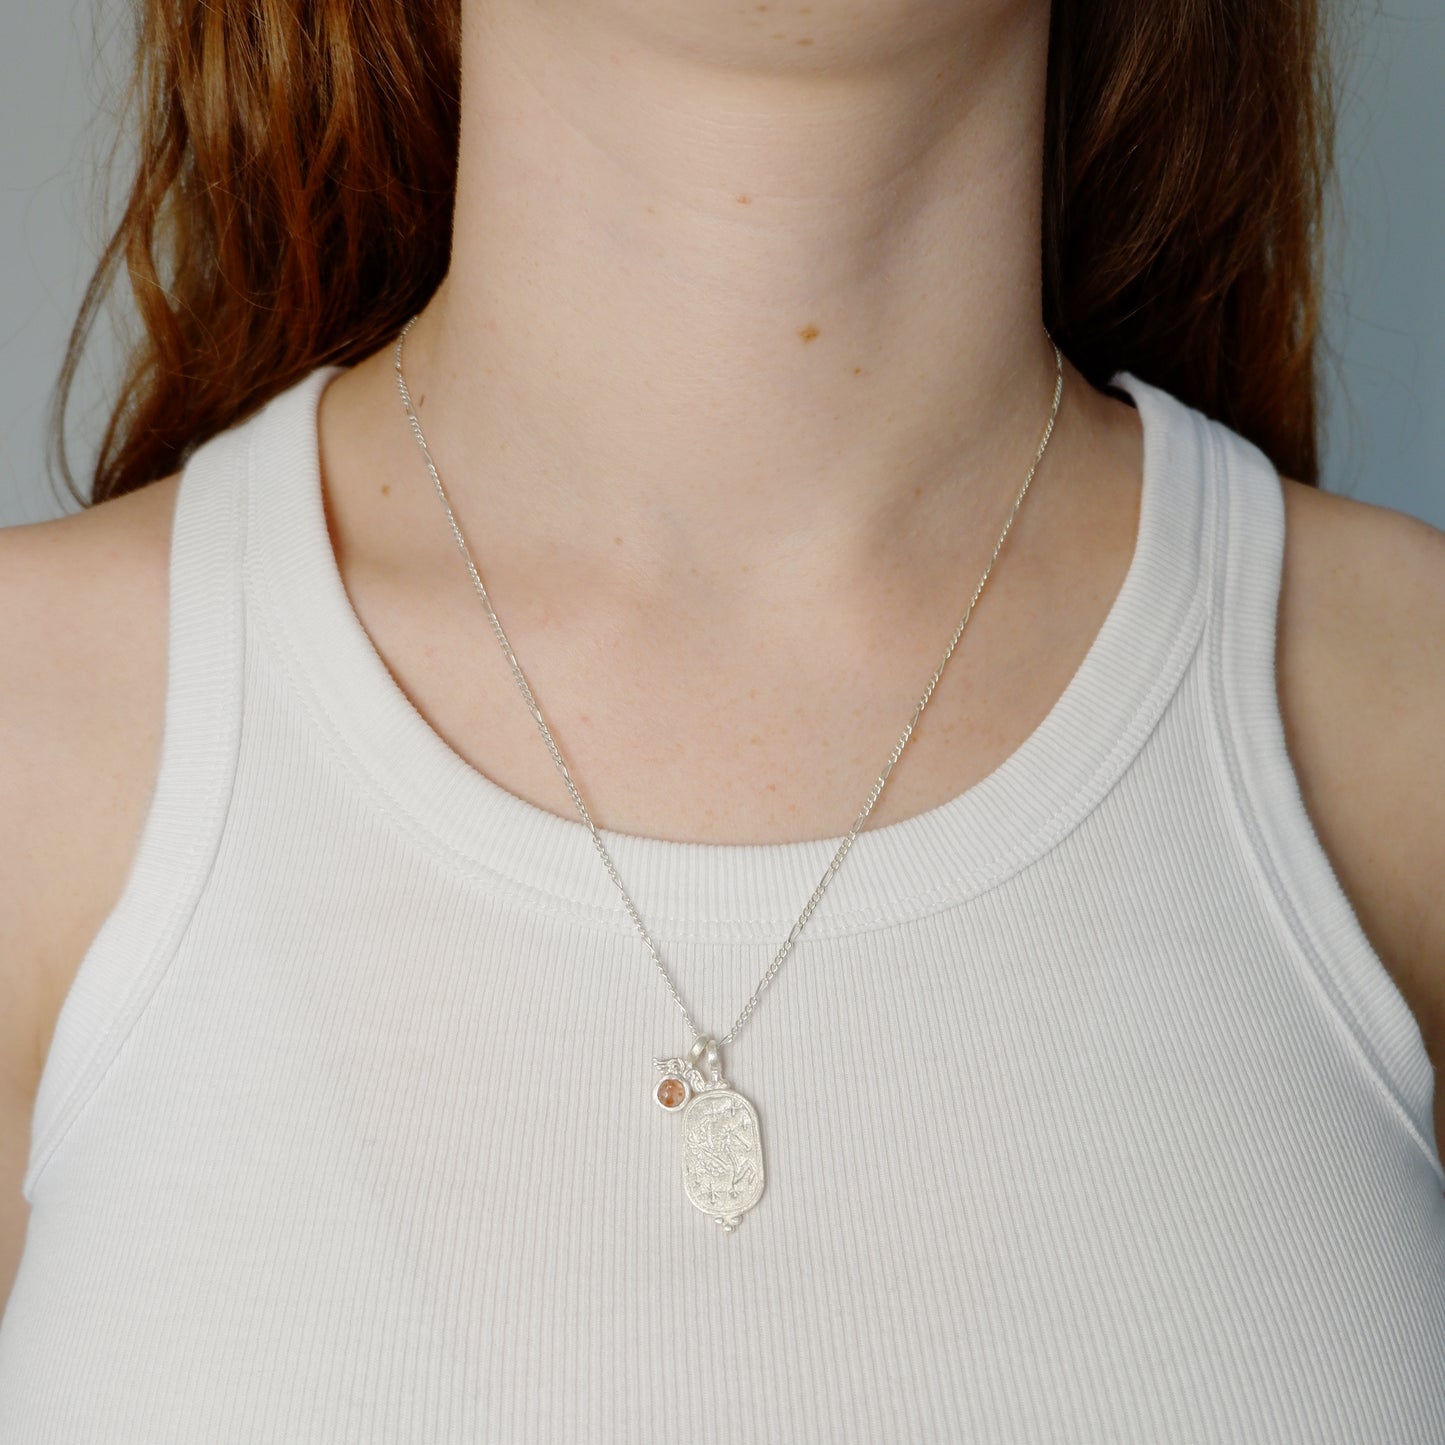 Hunt Of Hounds Pegasus Necklace. Coin pendant necklace with pegasus and stars. Sunstone charm with wings. On model.